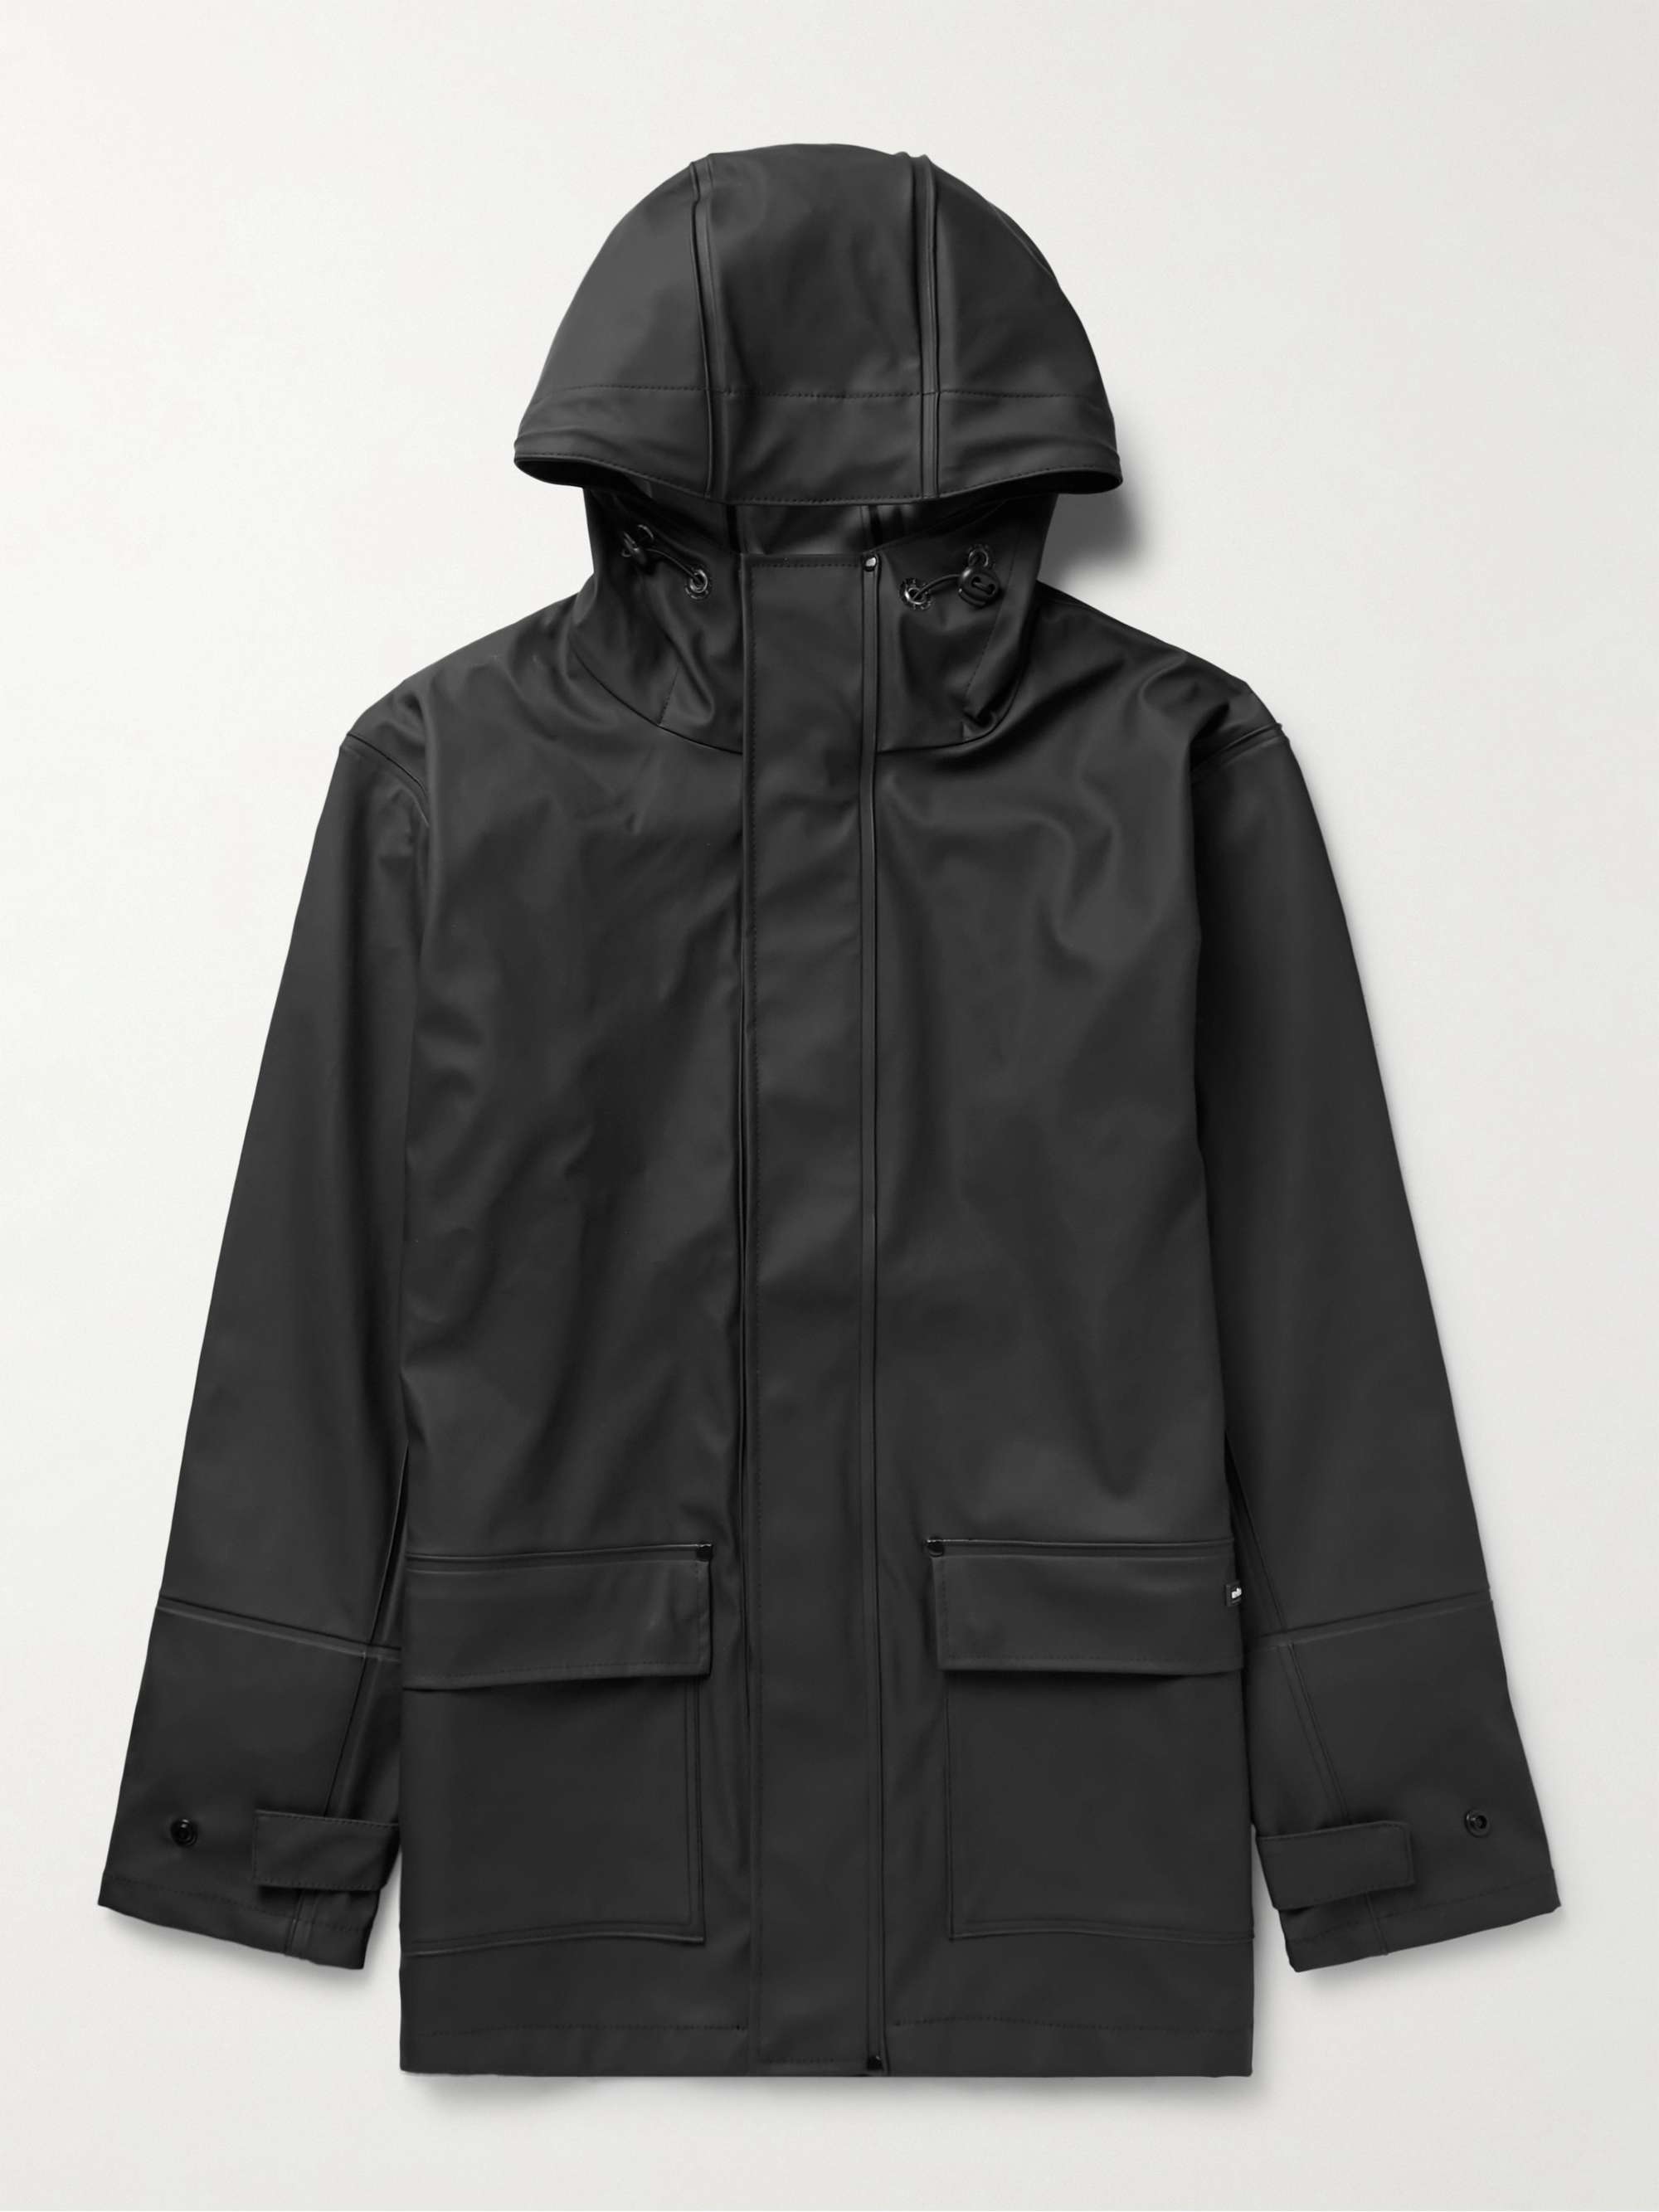 ARMOR-LUX Penmarch Coated-Shell Hooded Jacket | MR PORTER